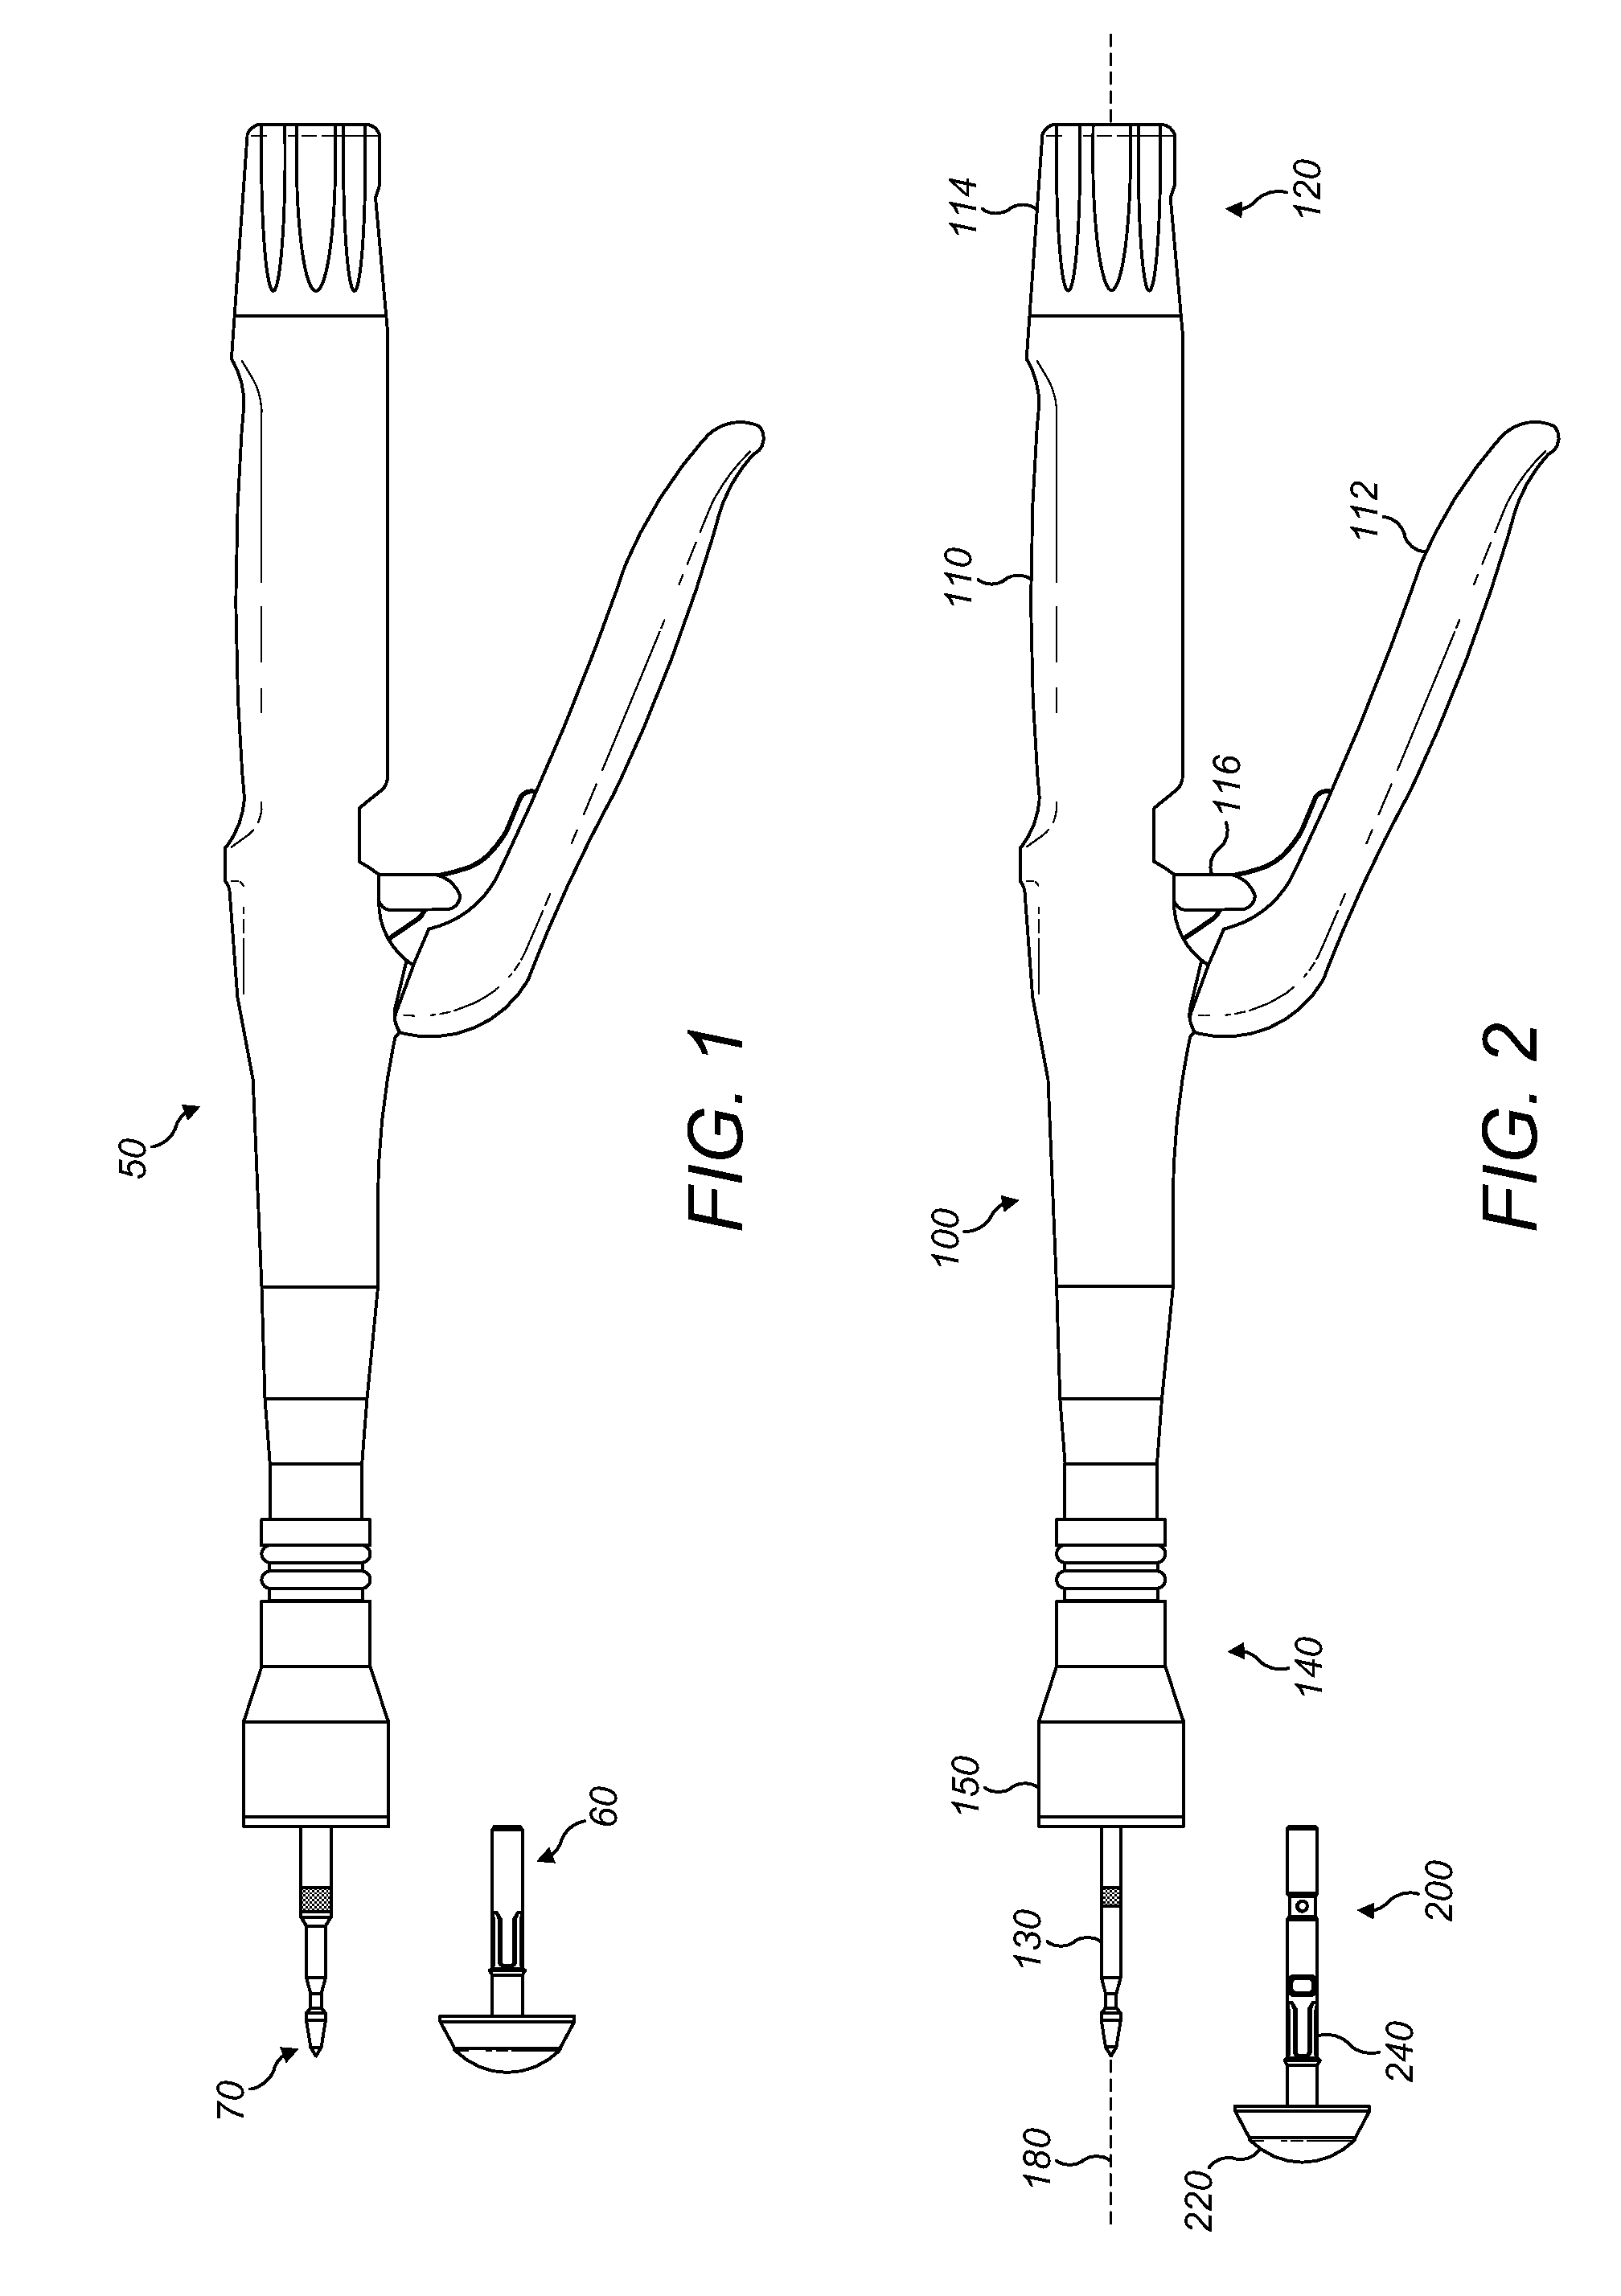 Method And Apparatus For Forming Stoma Trephines And Anastomoses